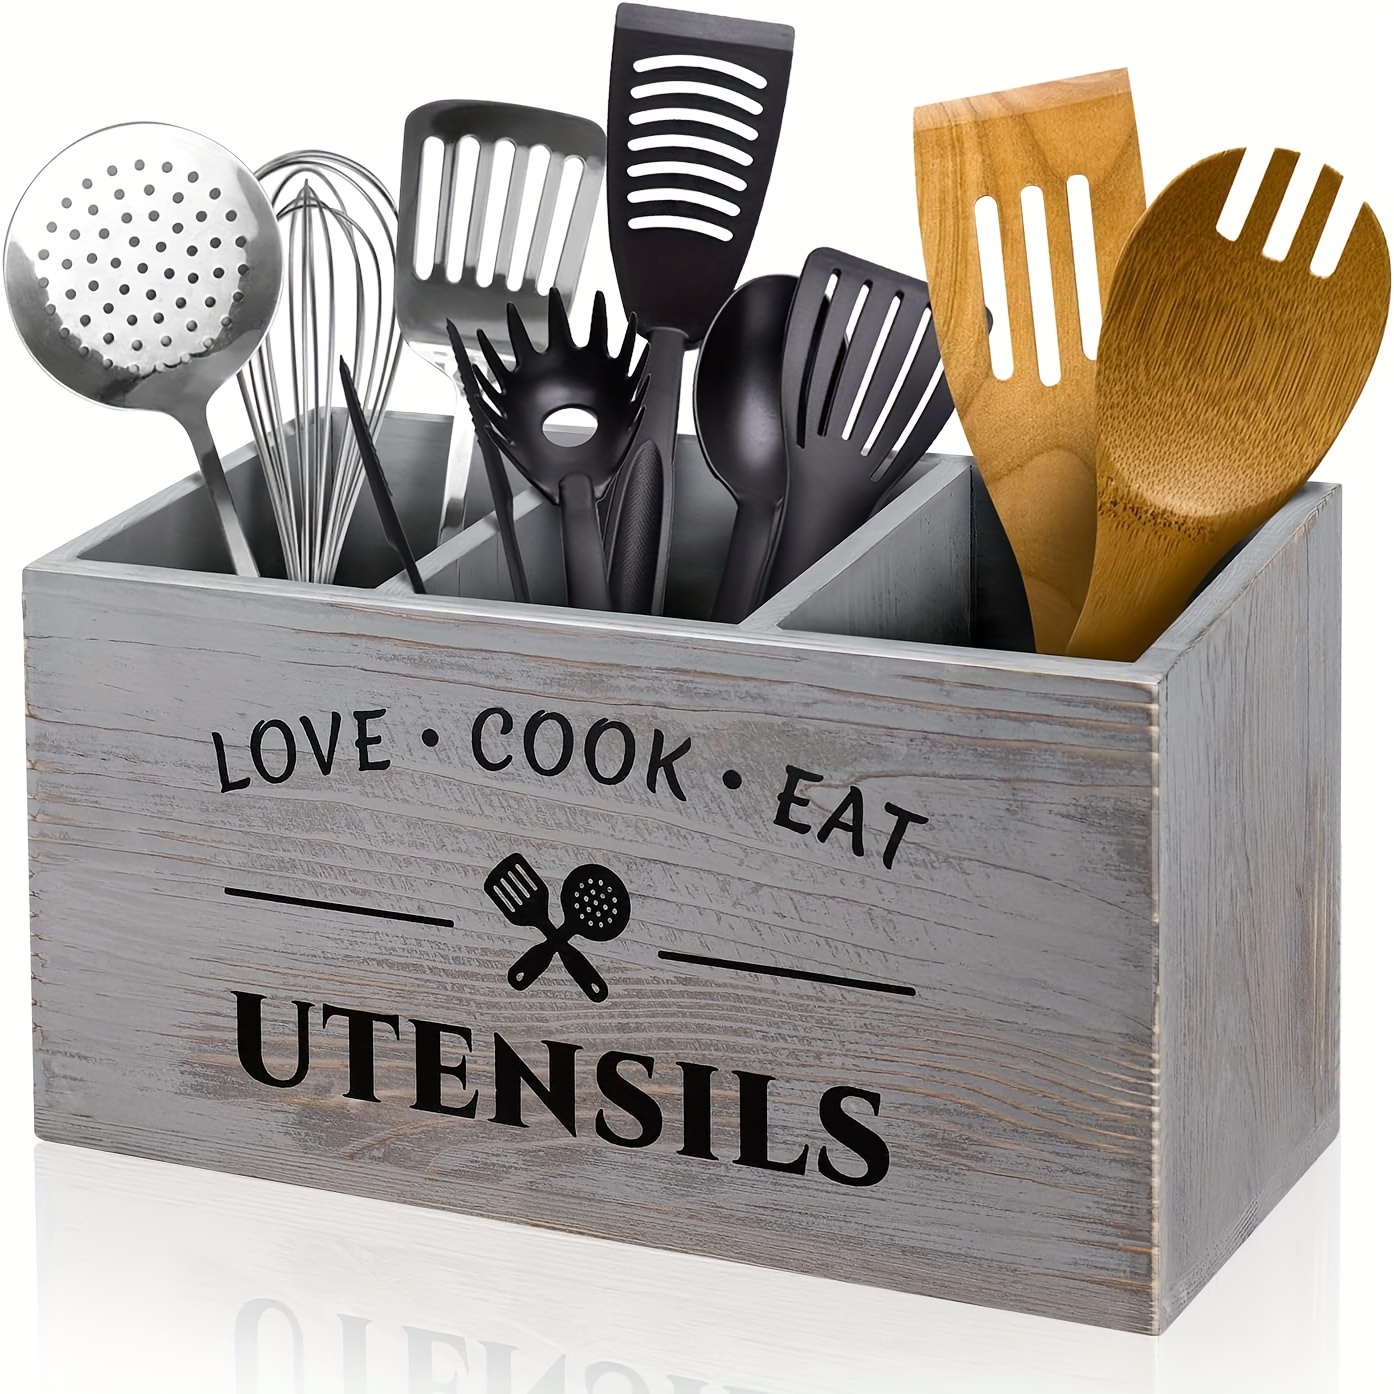 

1pc Flatware Organizer, Rustic Wooden 3-grid Utensil Caddy, Wall-mounted Flatware Organizer With "love Cook Eat" Design, For Kitchen And Restaurant, Kitchen Organizers And Storage, Kitchen Accessories